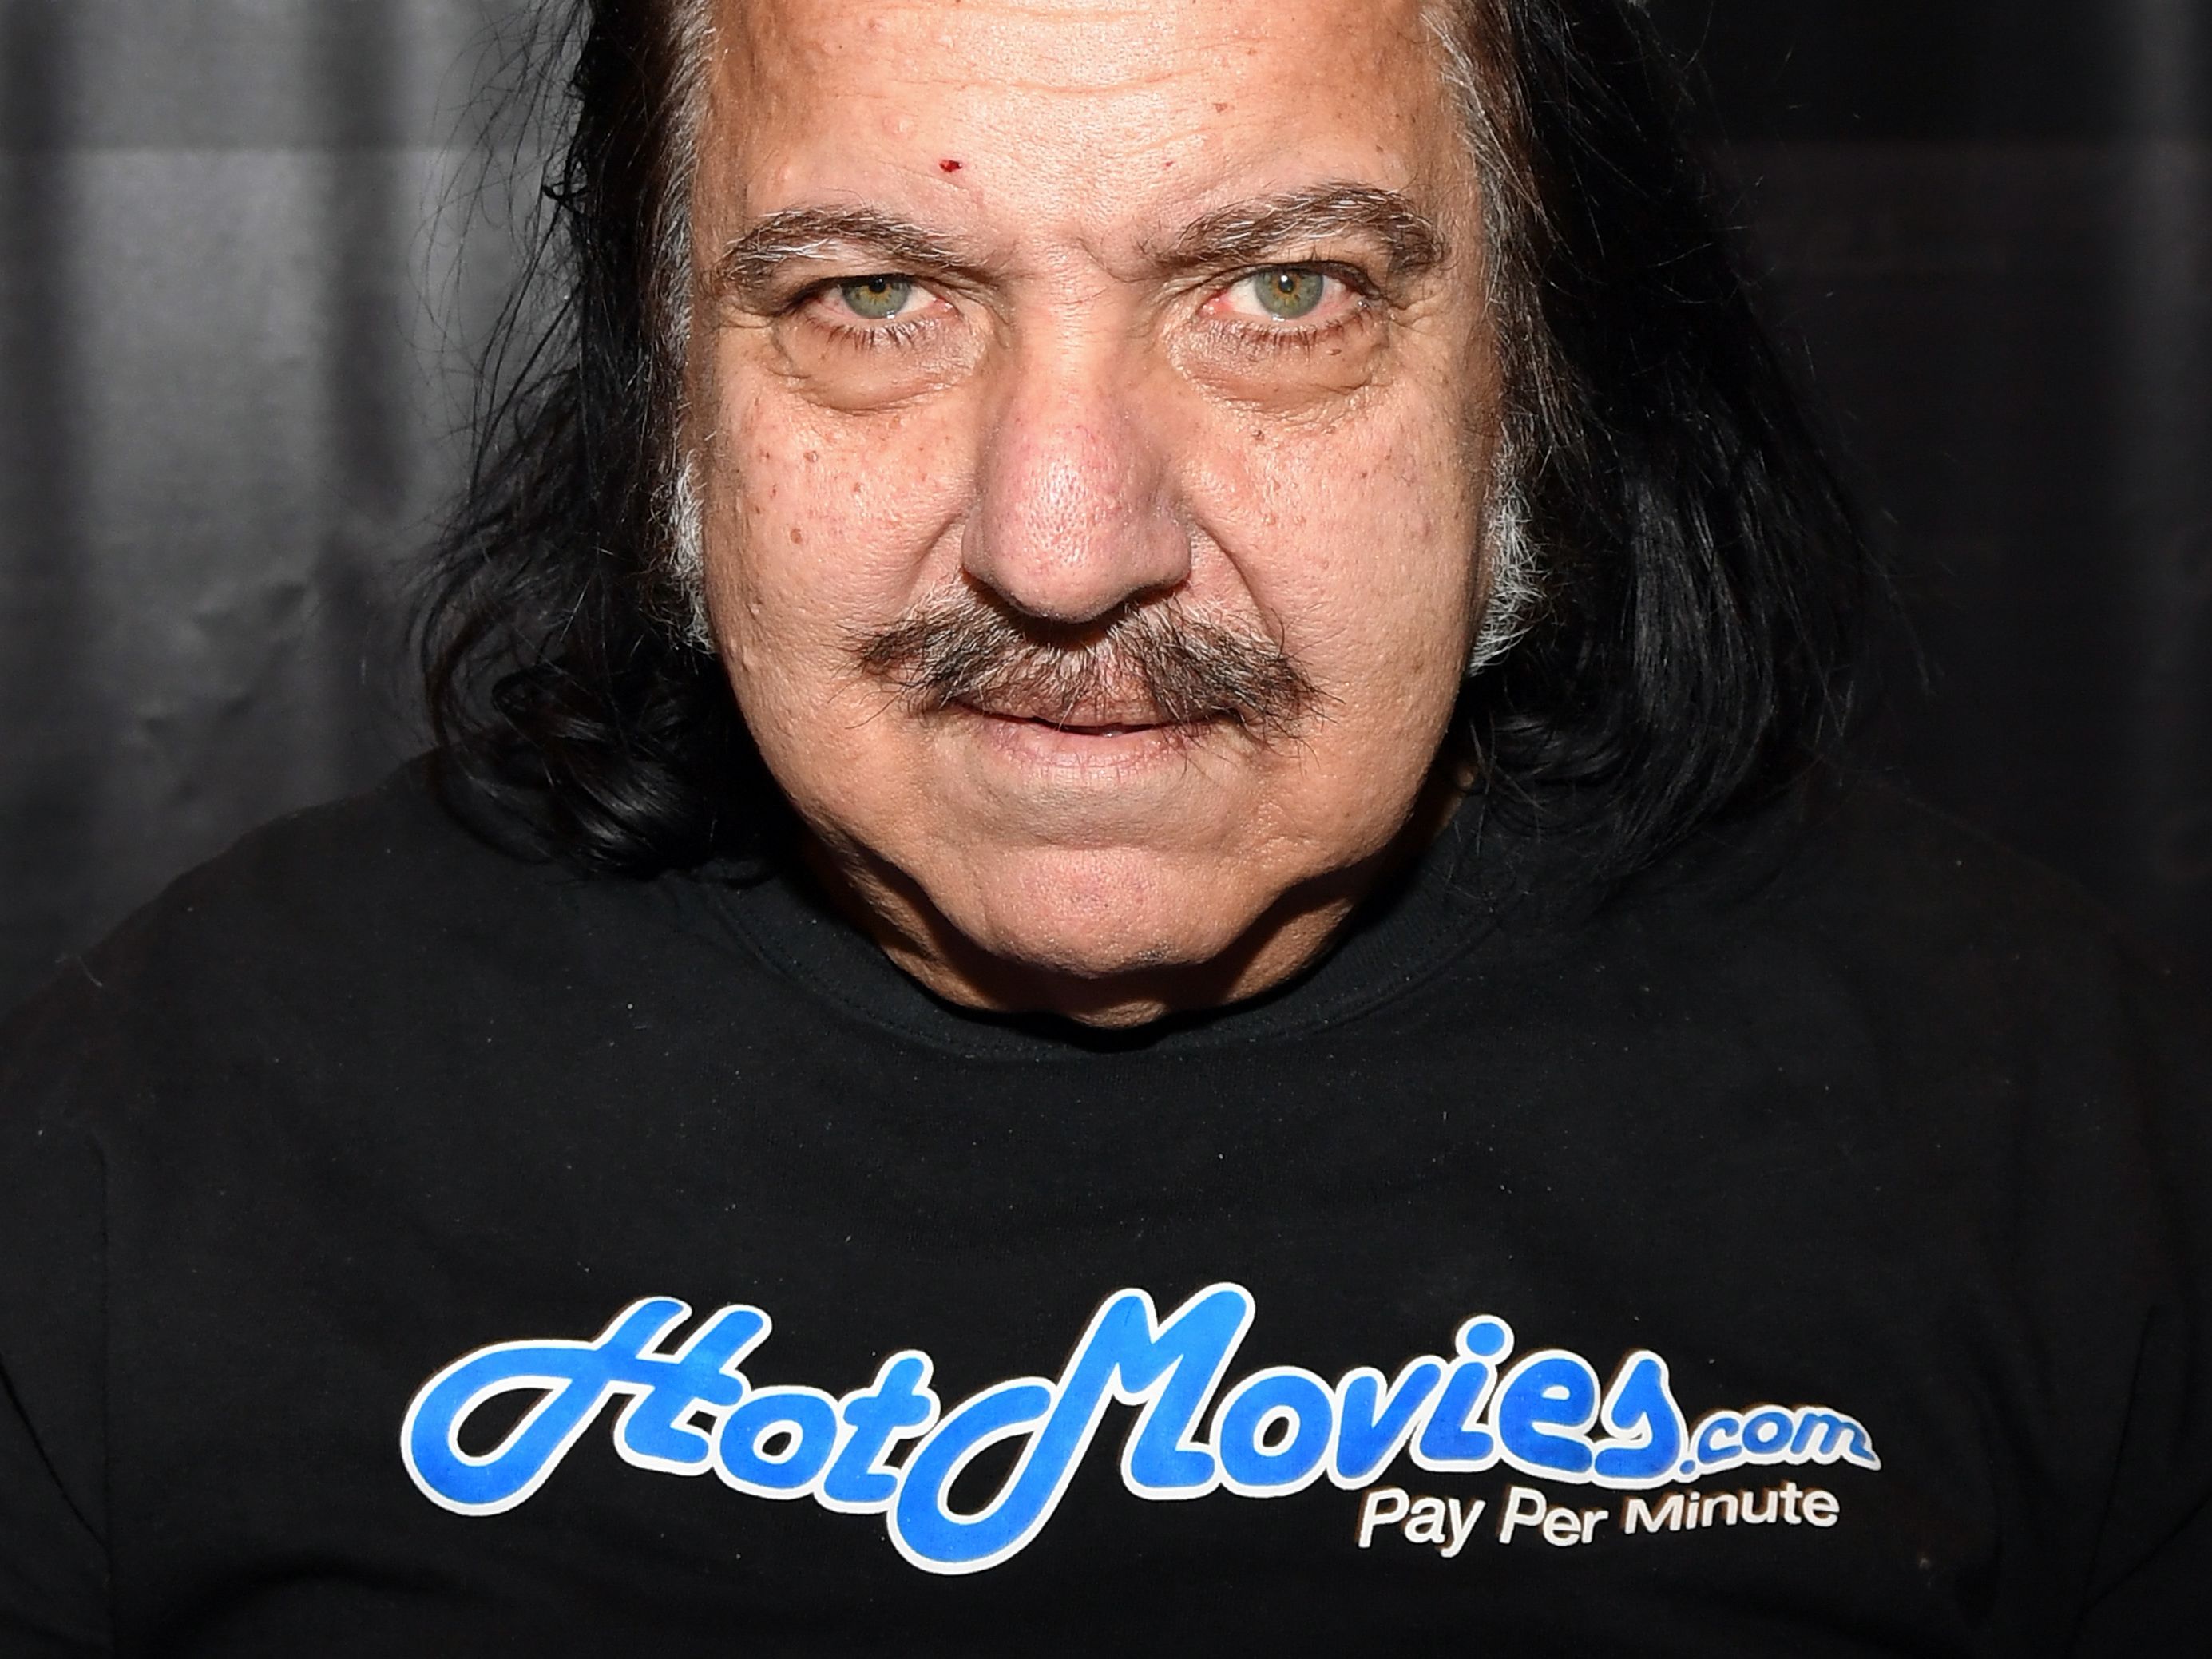 Rafe Sex - Porn star Ron Jeremy faces 20 more sexual assault charges | CNN